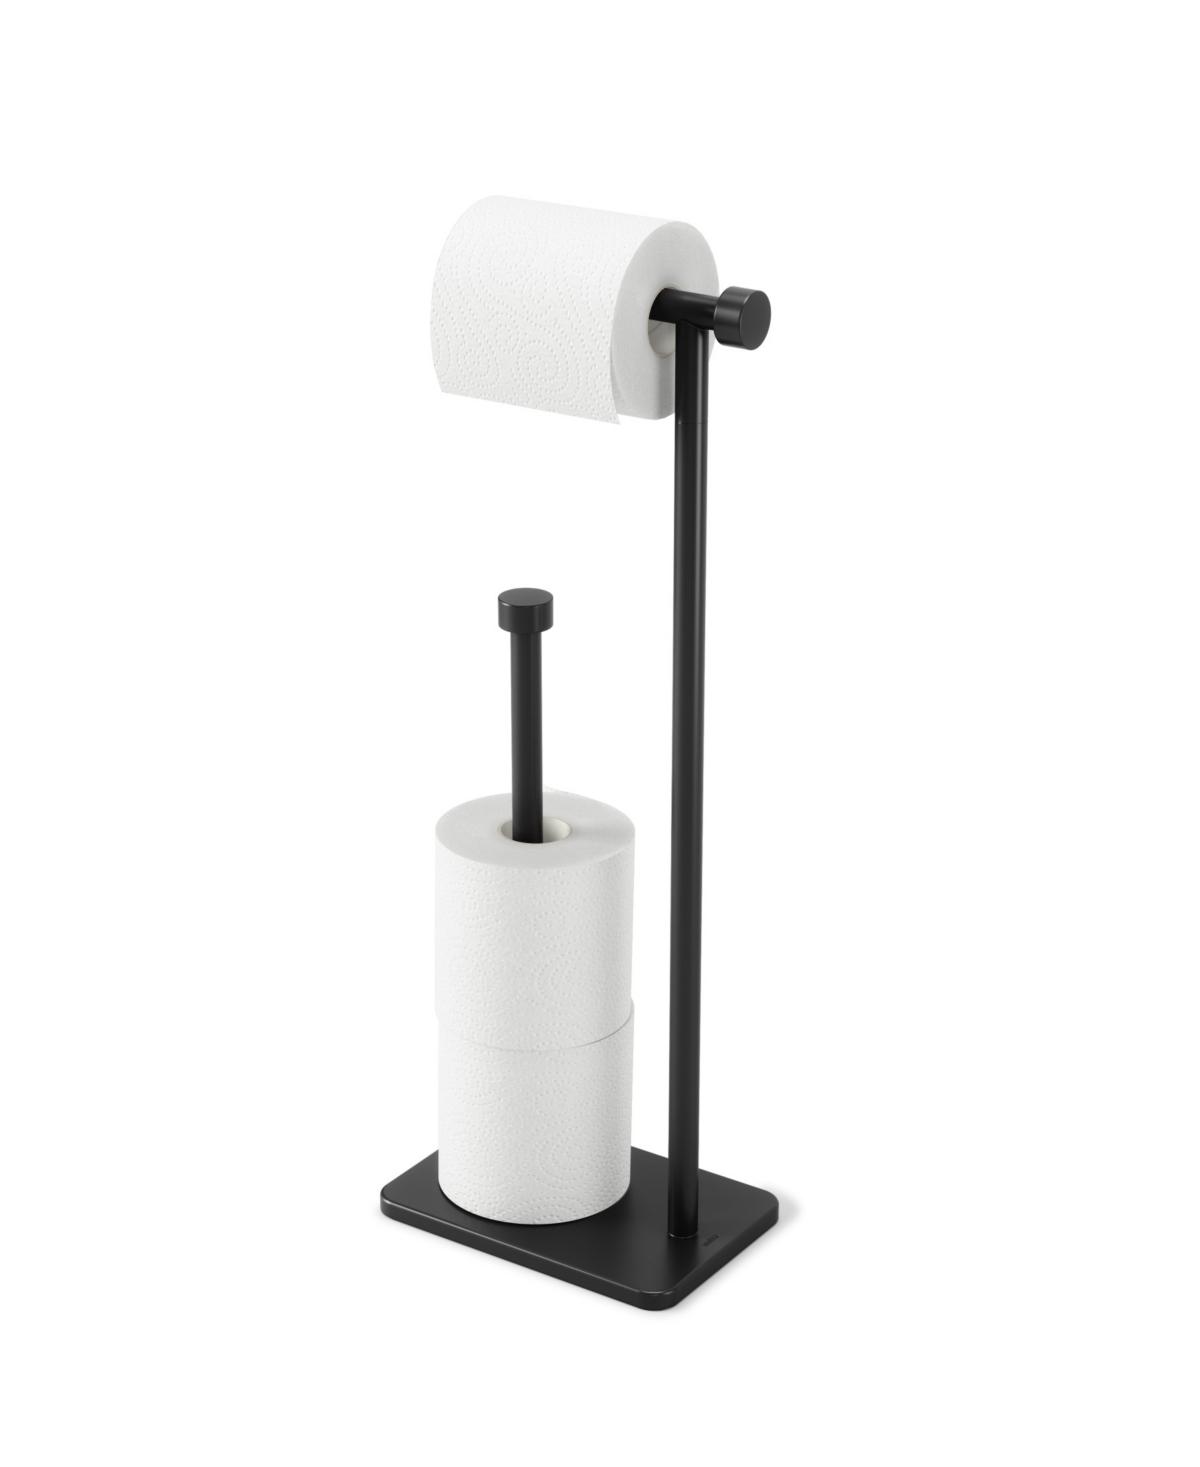 Umbra Cappa Toilet Paper Holder And Reserve In Black